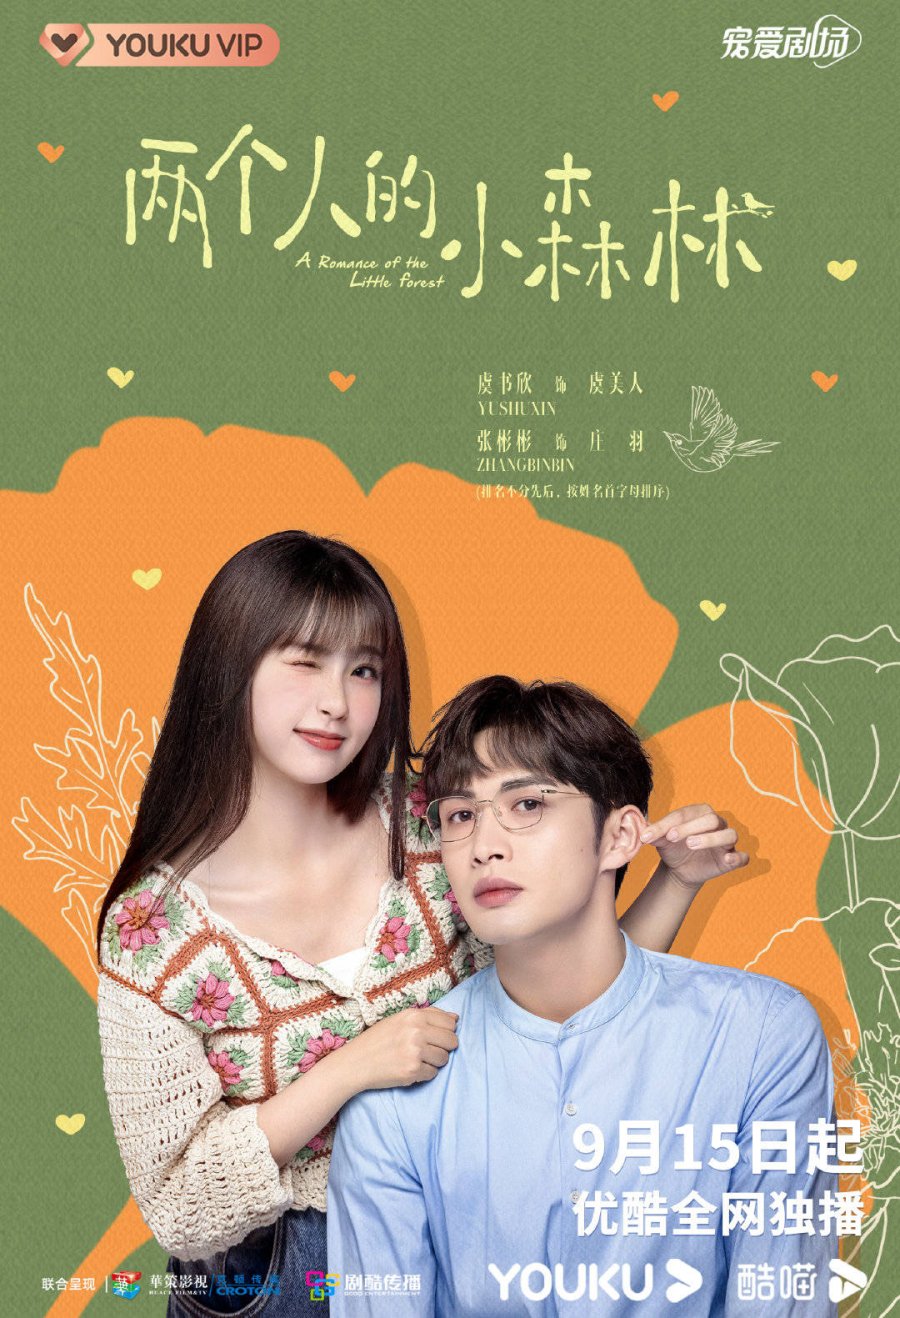 image poster from imdb, mydramalist - ​A Romance of the Little Forest (2022)